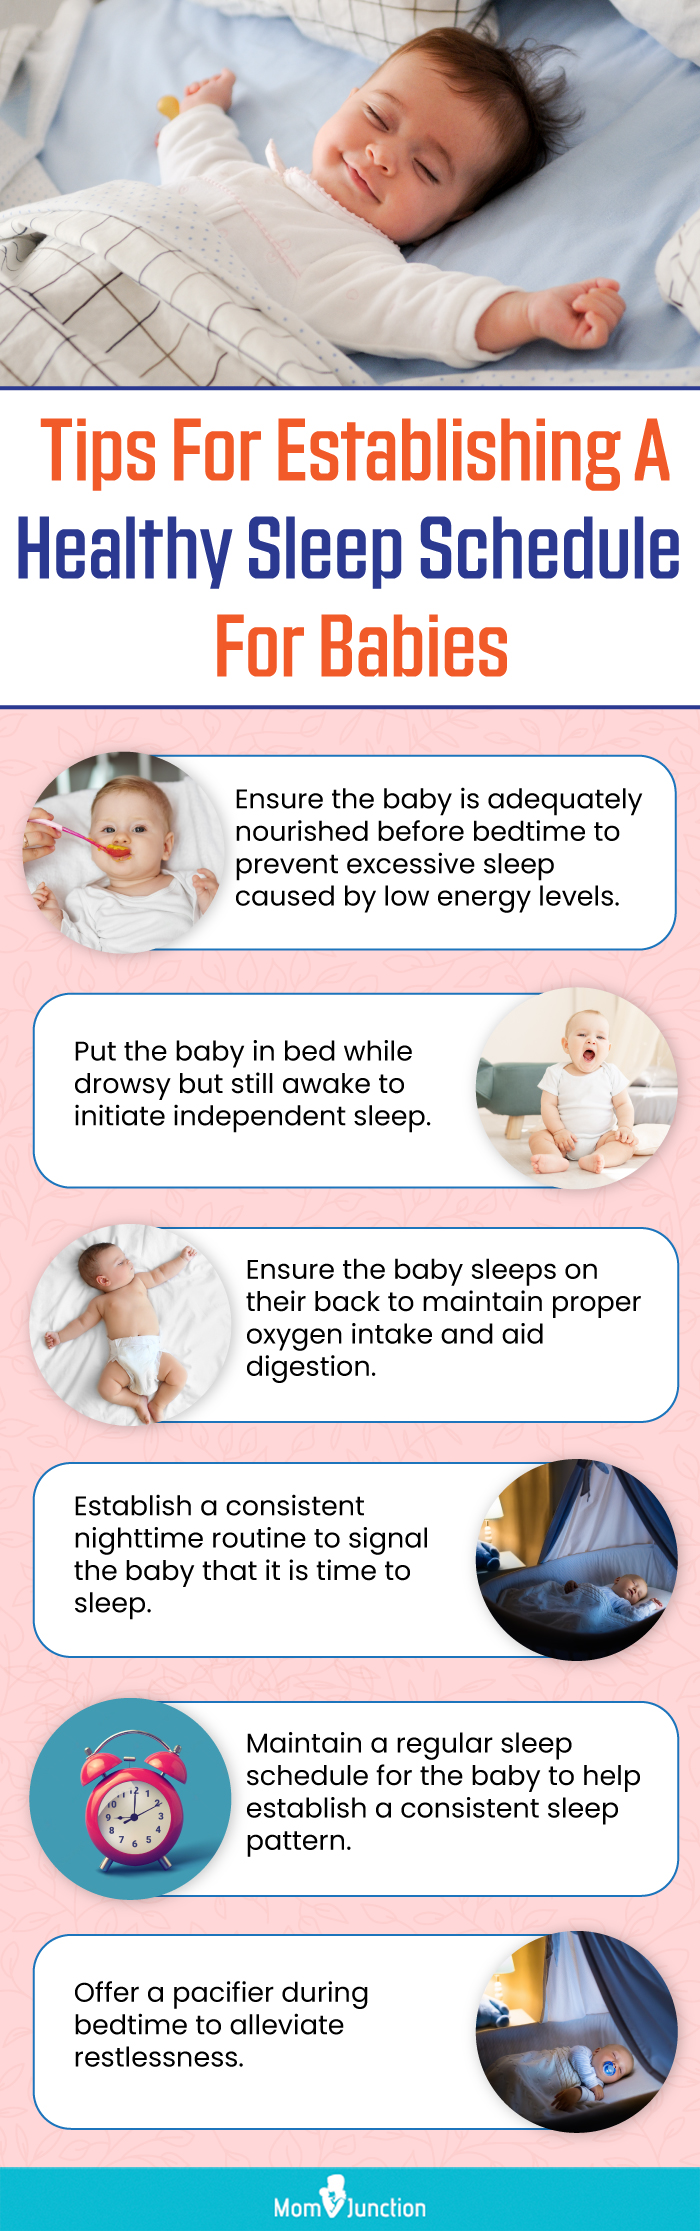 Newborn sleeping too much: What is normal and what to do